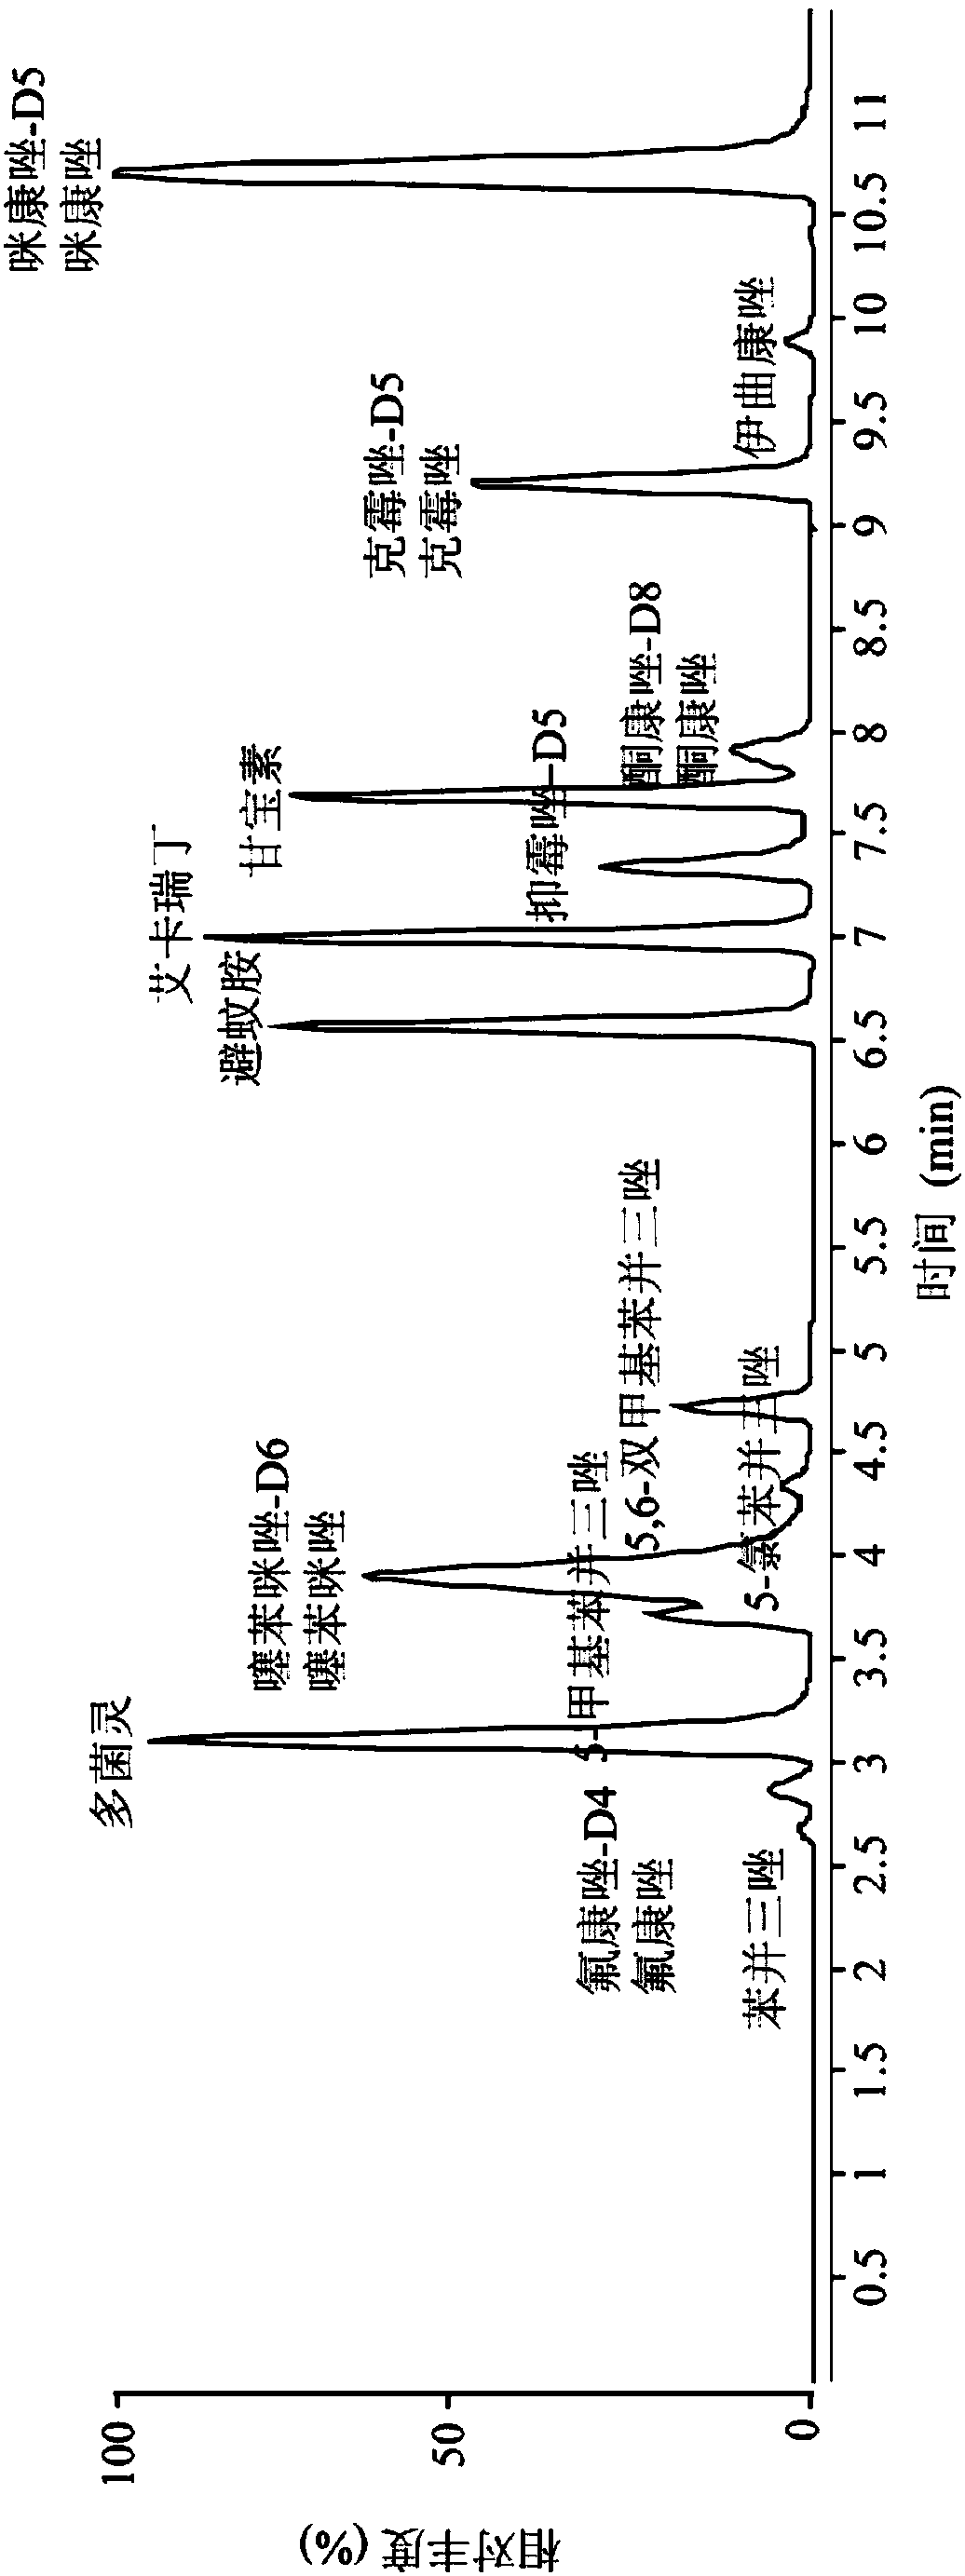 Method for detecting PCPS (personal care products) in fish bile